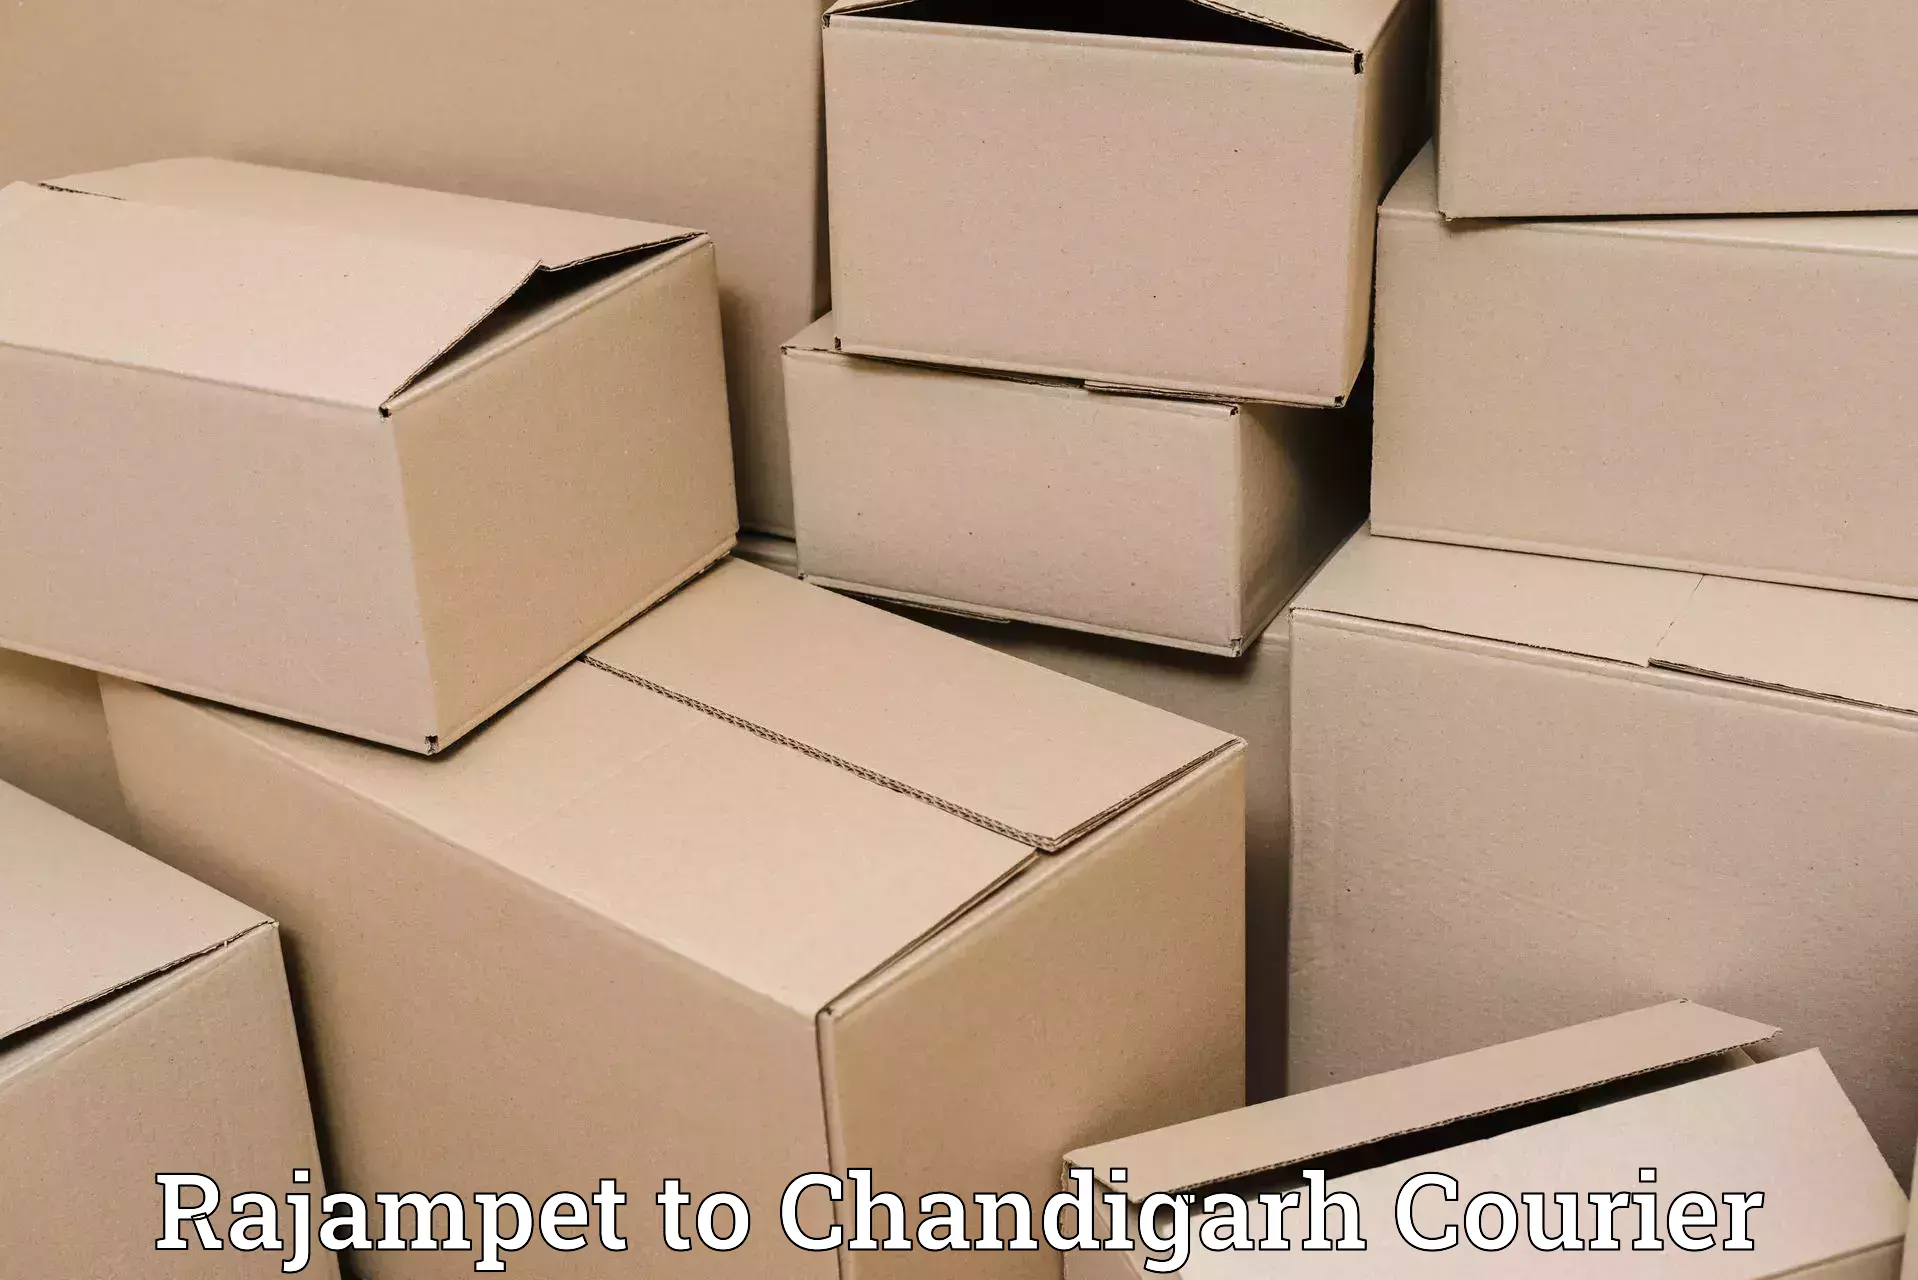 Luggage shipment specialists Rajampet to Chandigarh